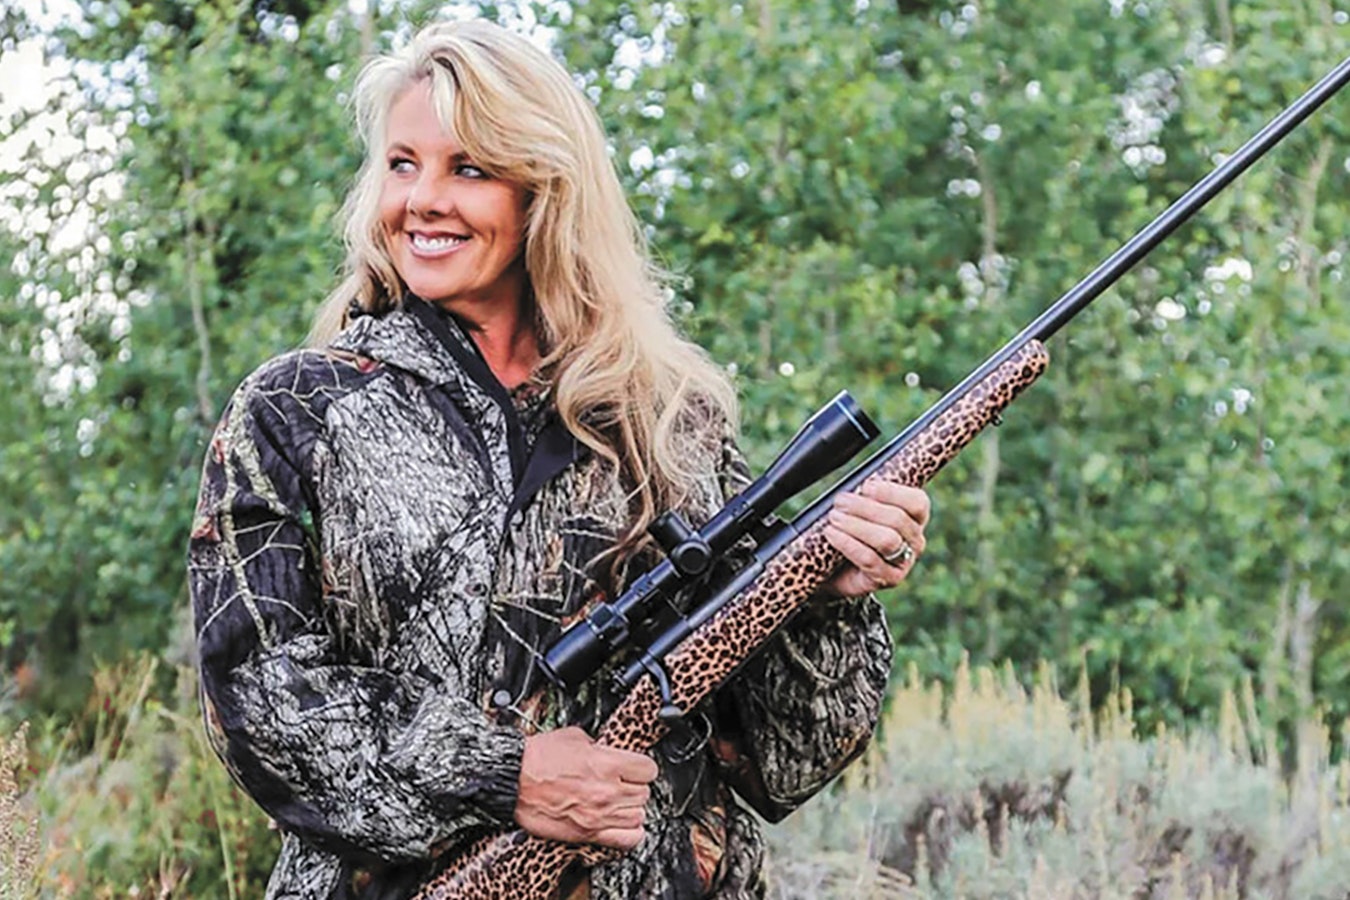 Melanie Peterson was the winner of the 2018 reality television show, "Extreme Huntress."